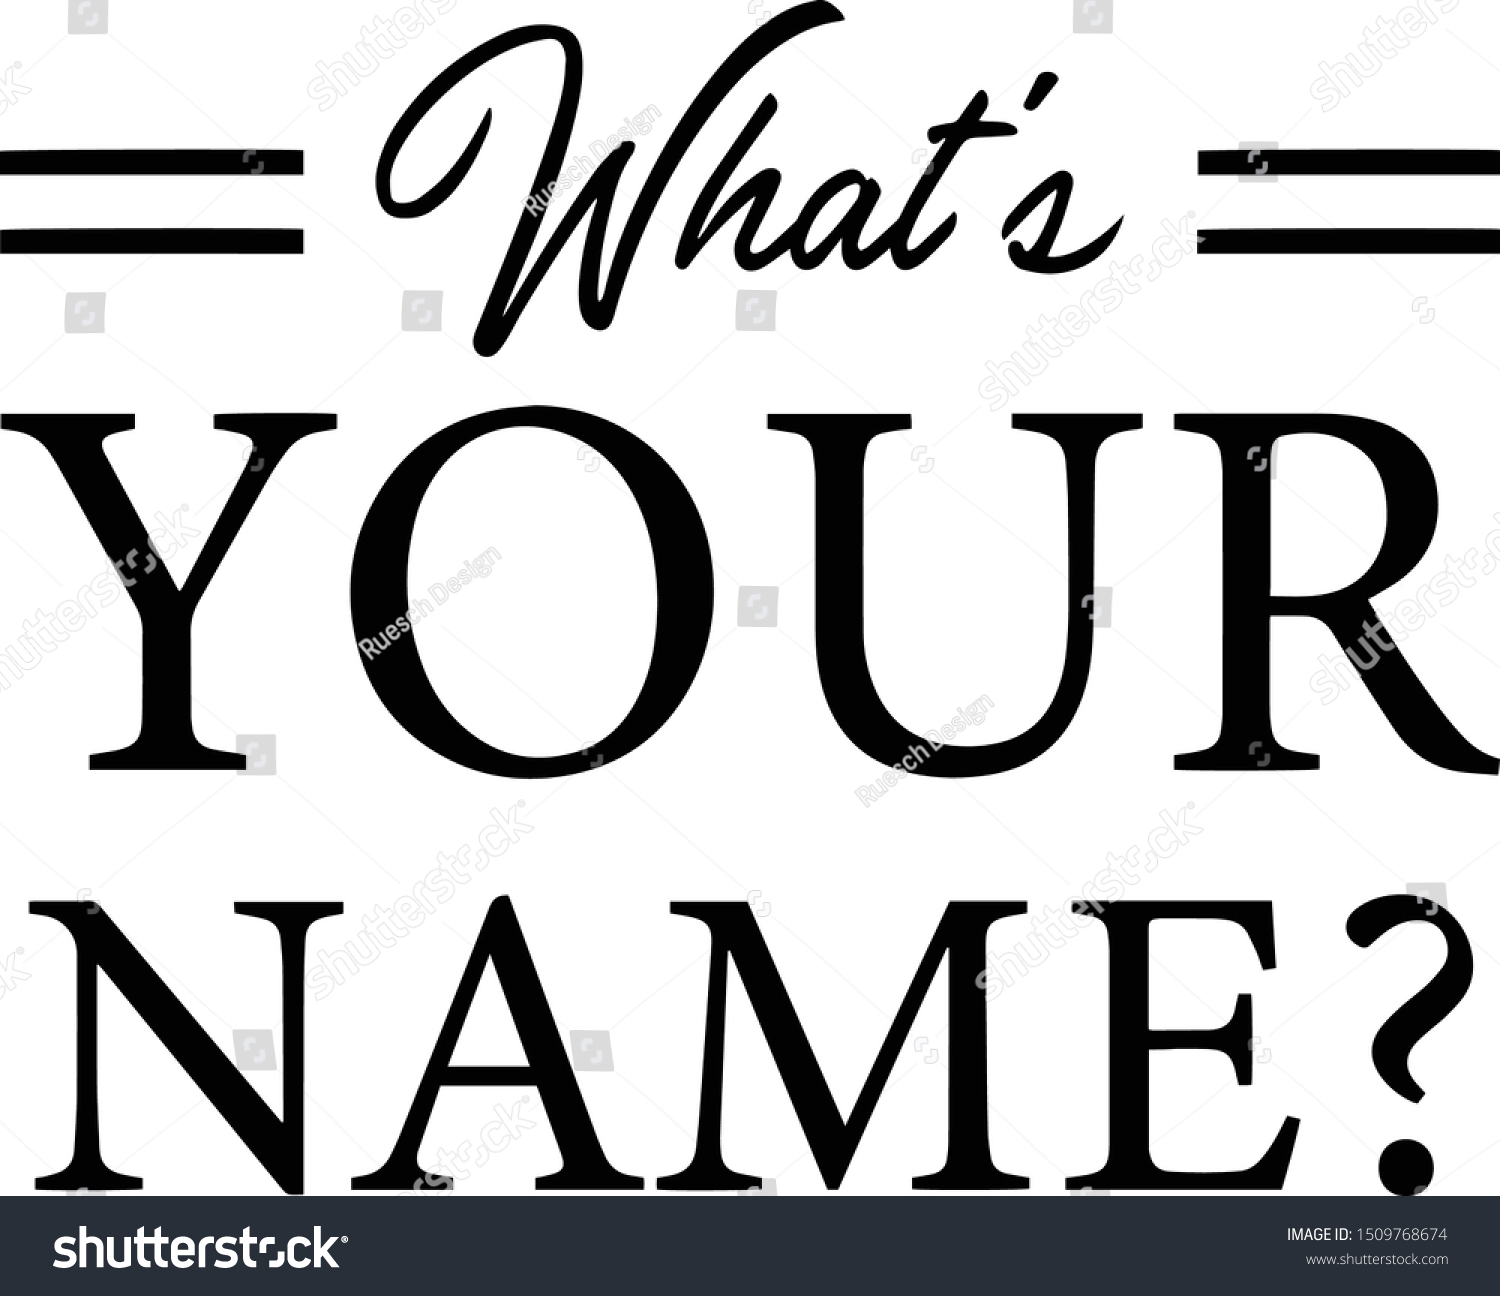 What’s your name